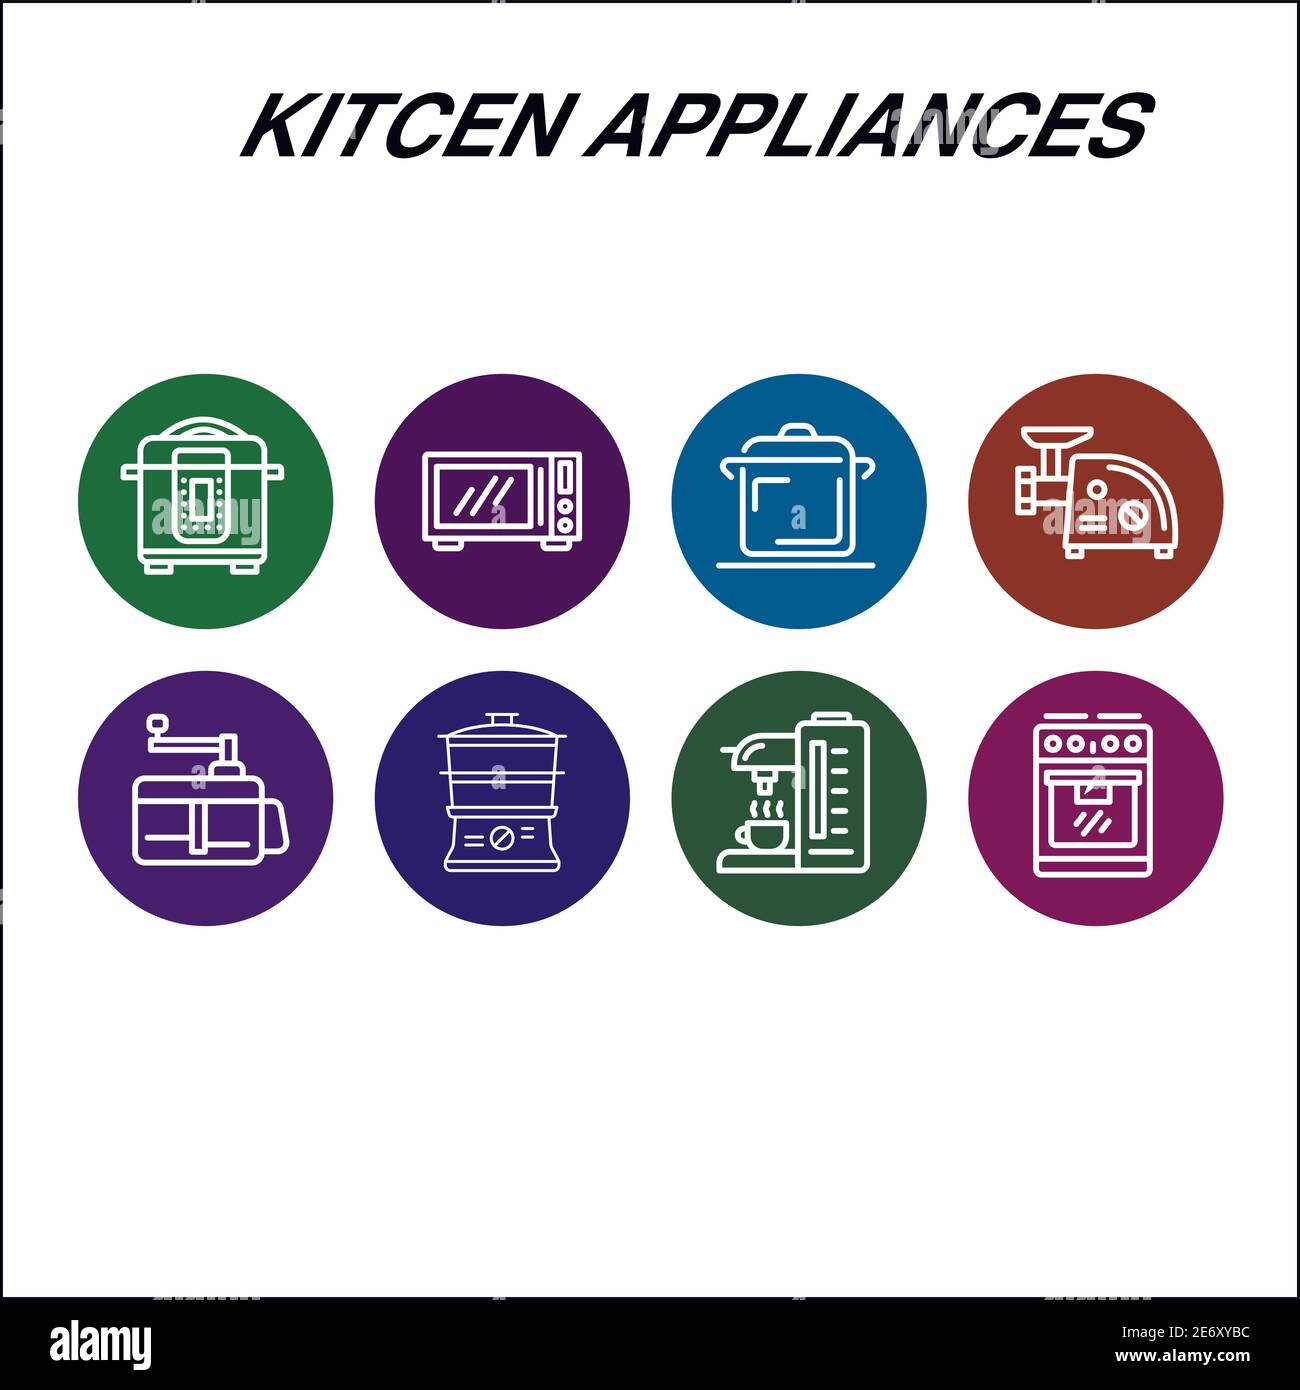 Modern Kitchen appliances Infographic design template. Kitchenware Infographic visualization in bubble design on white background. Creative vector Stock Vector